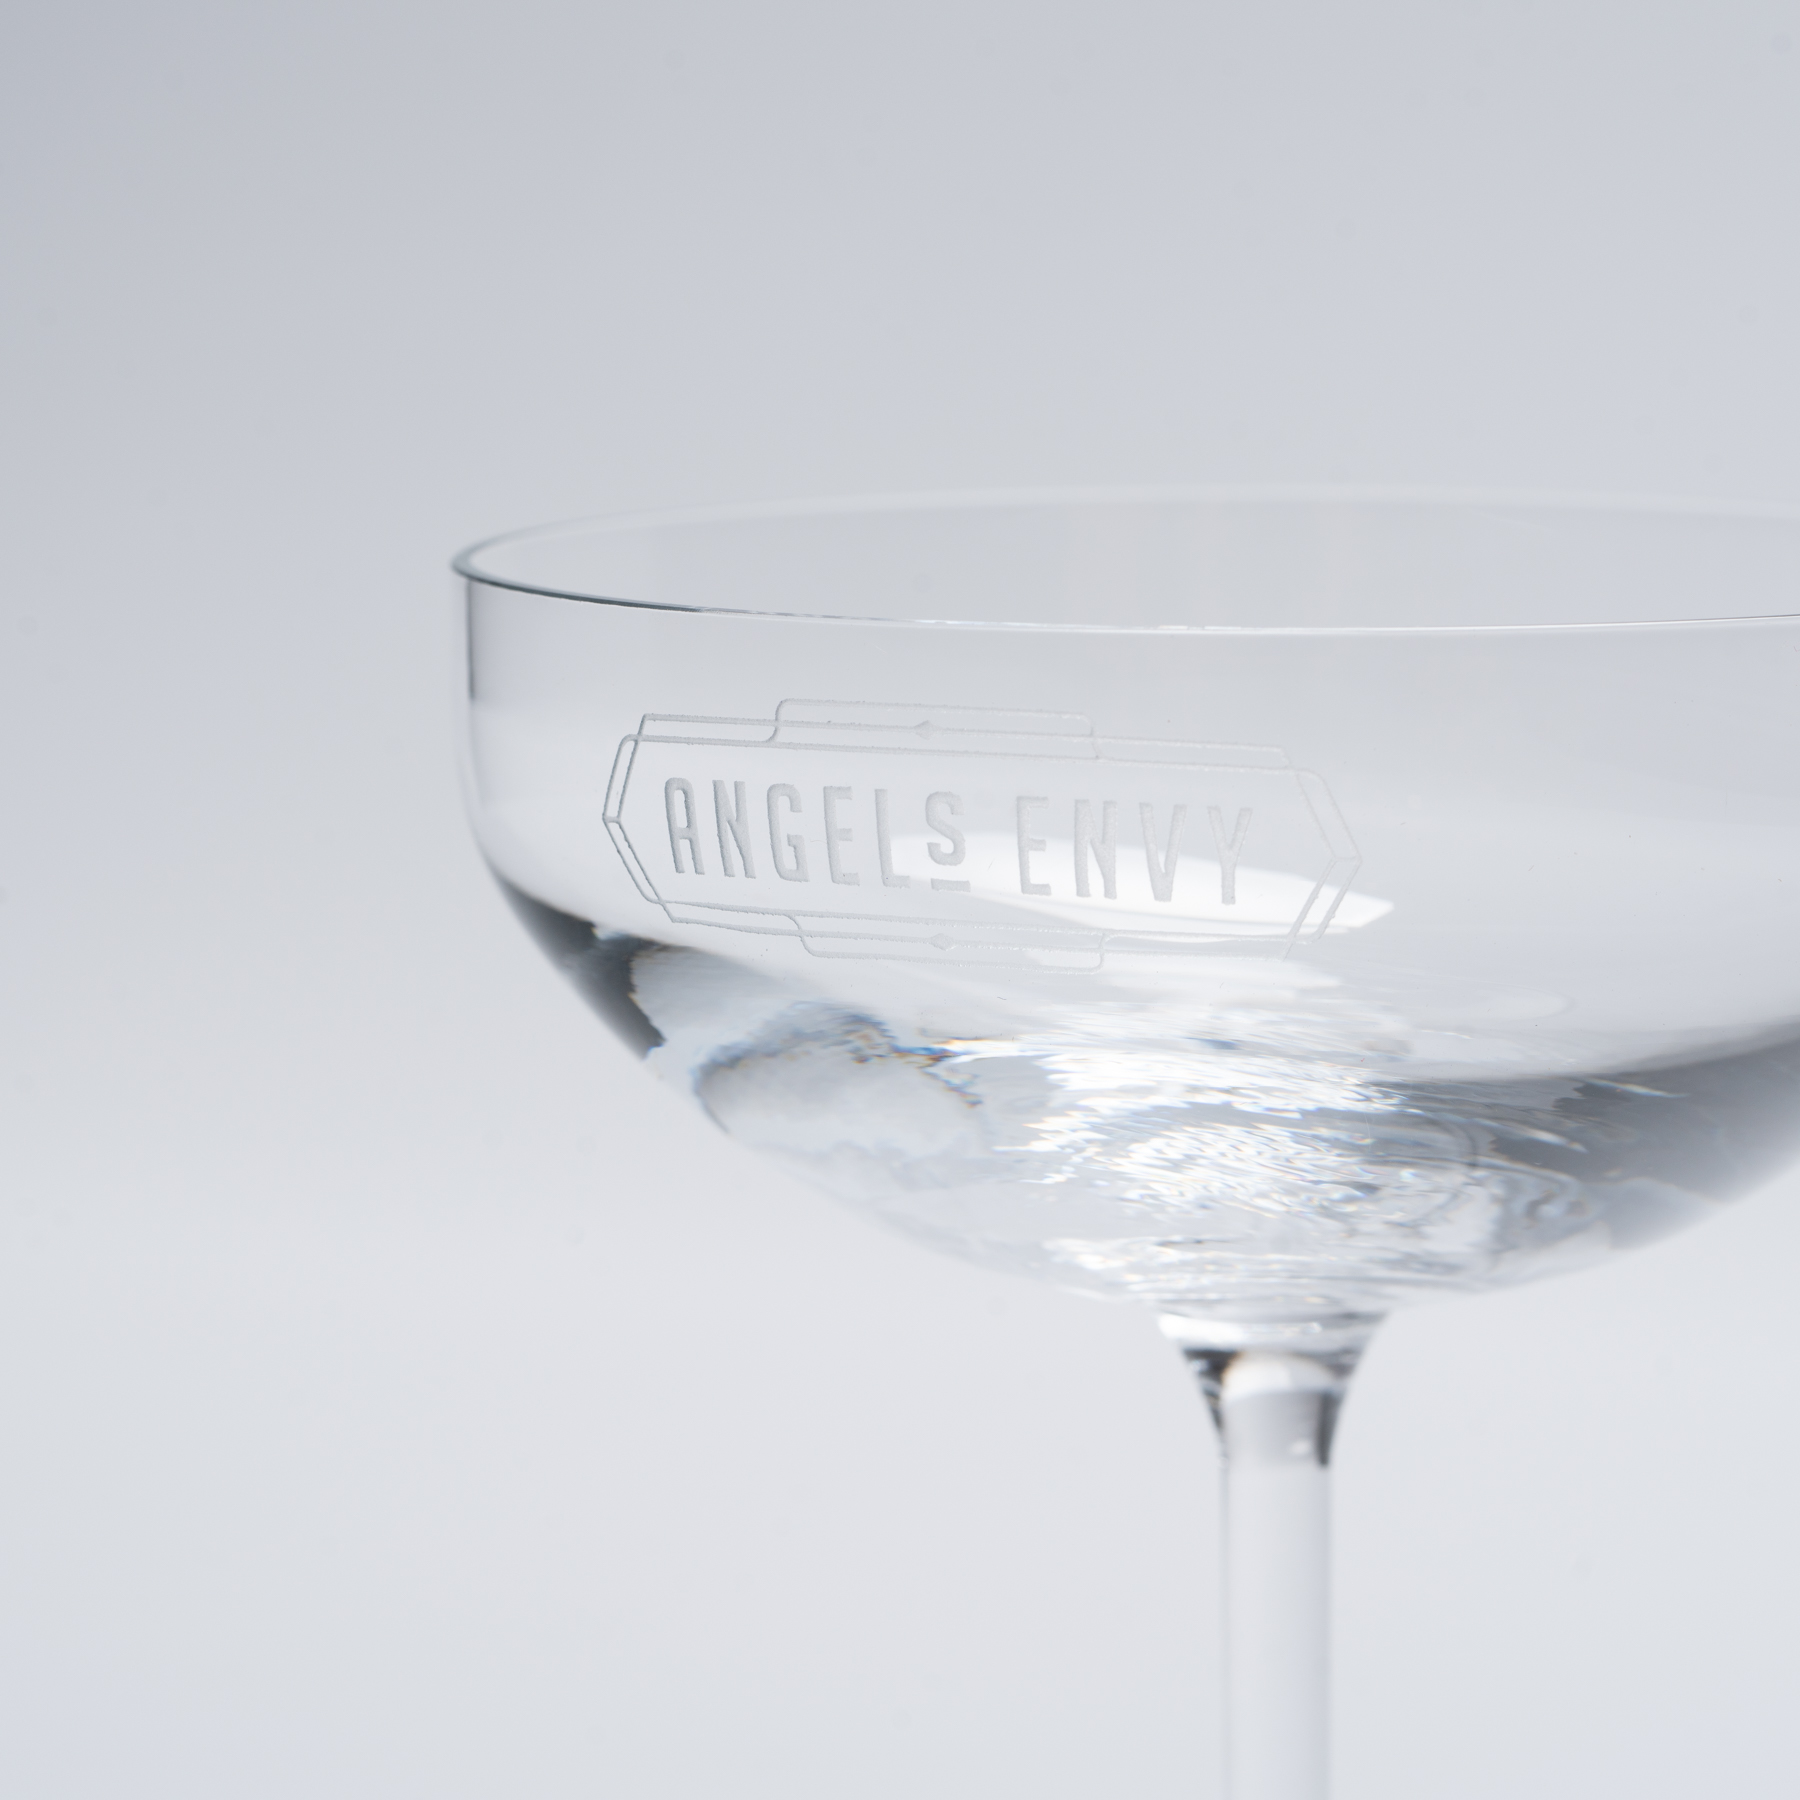 Coupe Glass